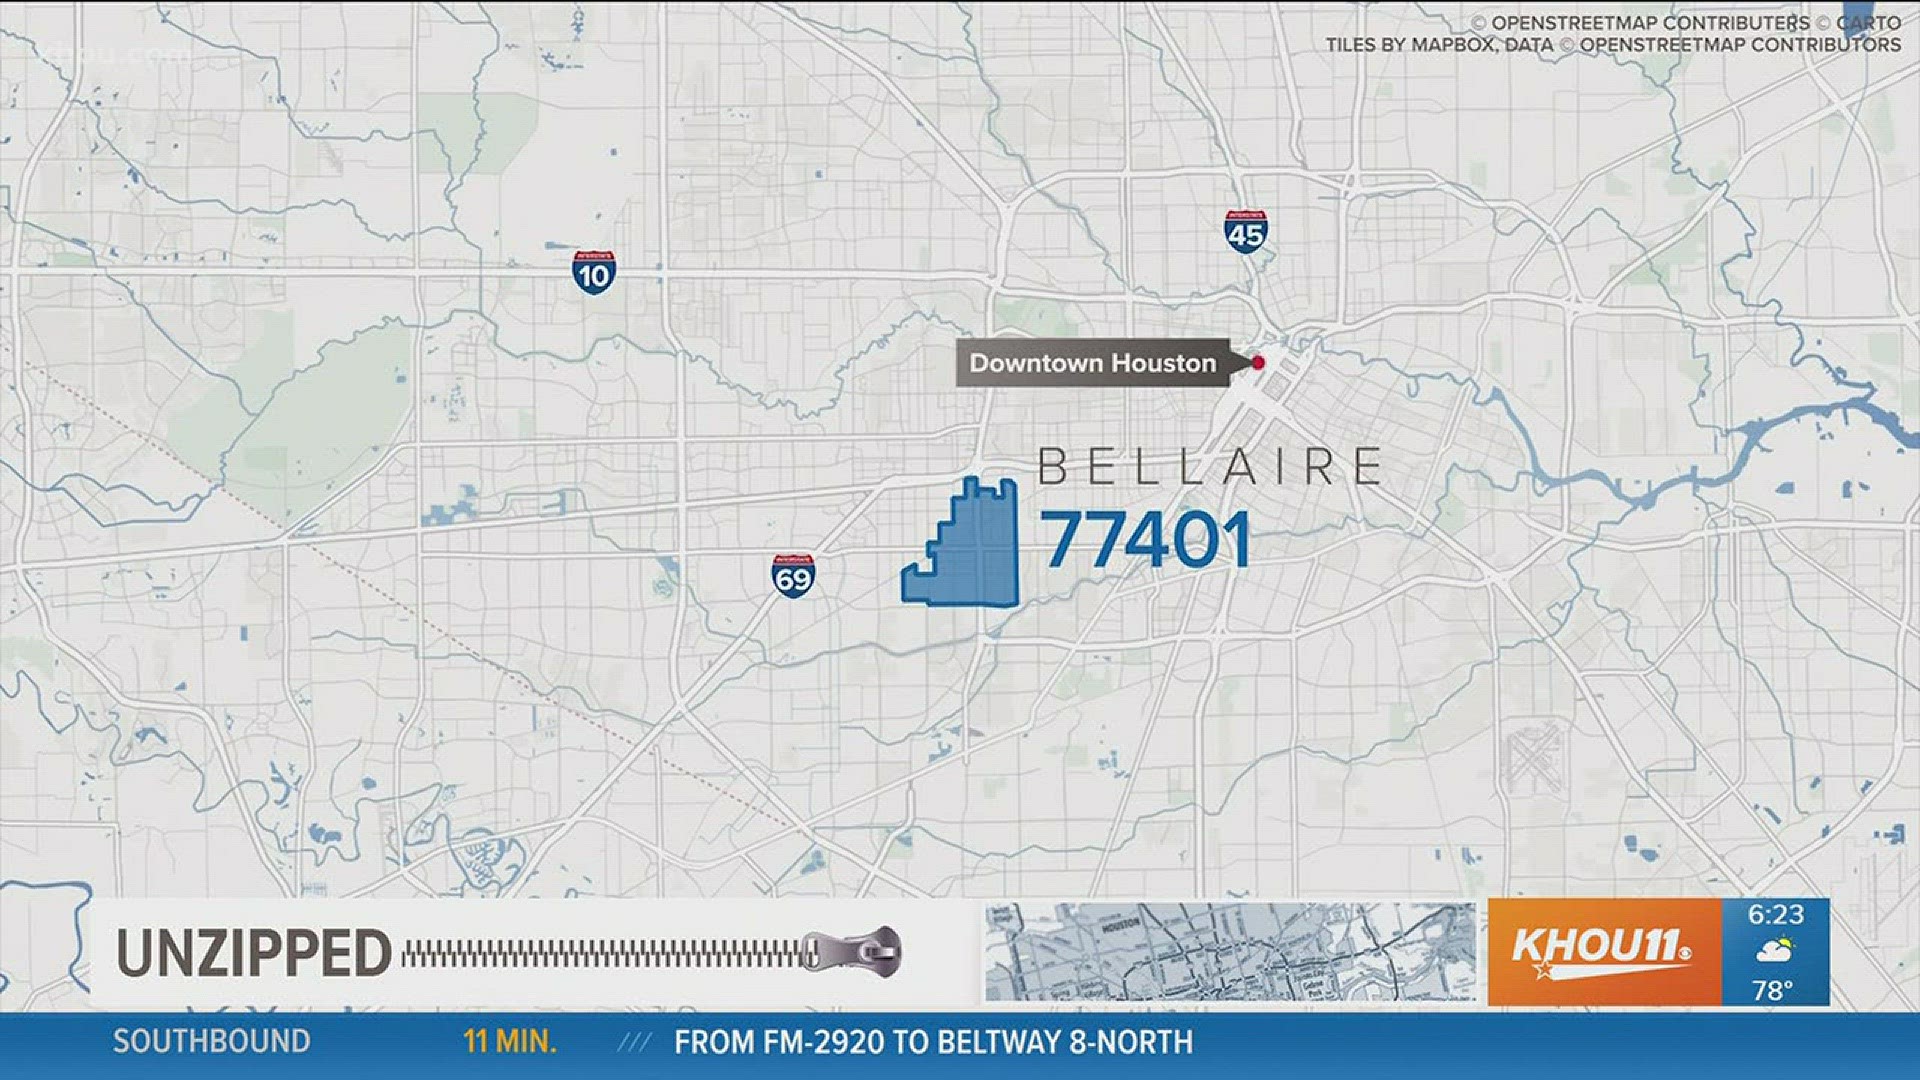 We've been paying a lot of attention to Bellaire lately. The city within a city just celebrated it's 100 birthday. On Wednesday, we saw the brand new H-E-B on Bissonnet open. So Thursday we are back in Bellaire to Unzip it's one and only zip code...77401.